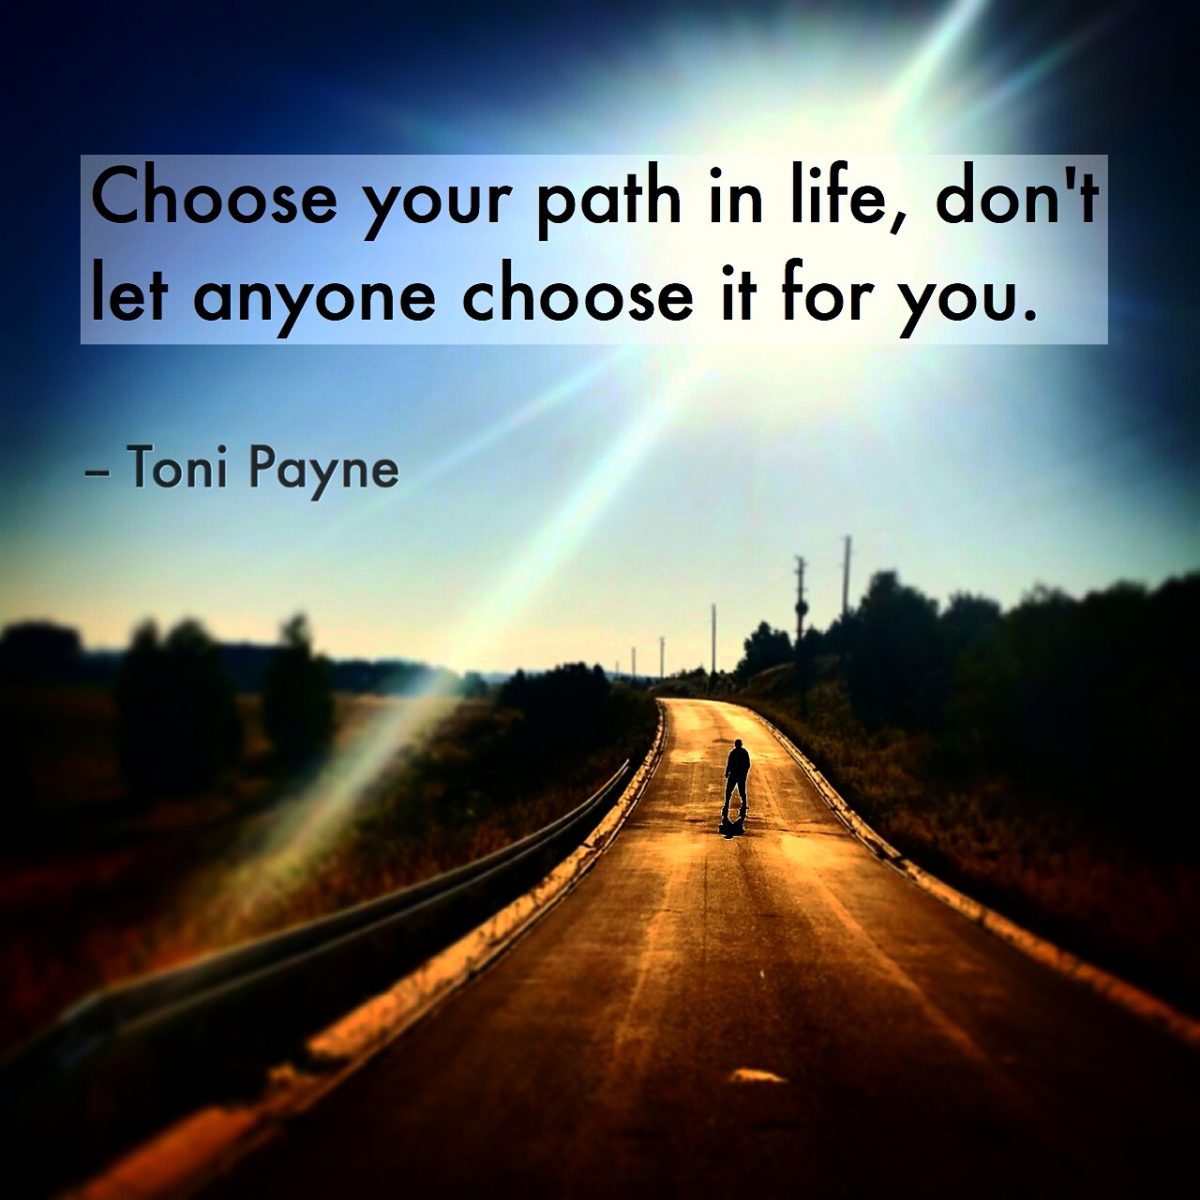 Quote About Choosing Your Path In Life 1200x1200 Cropped 